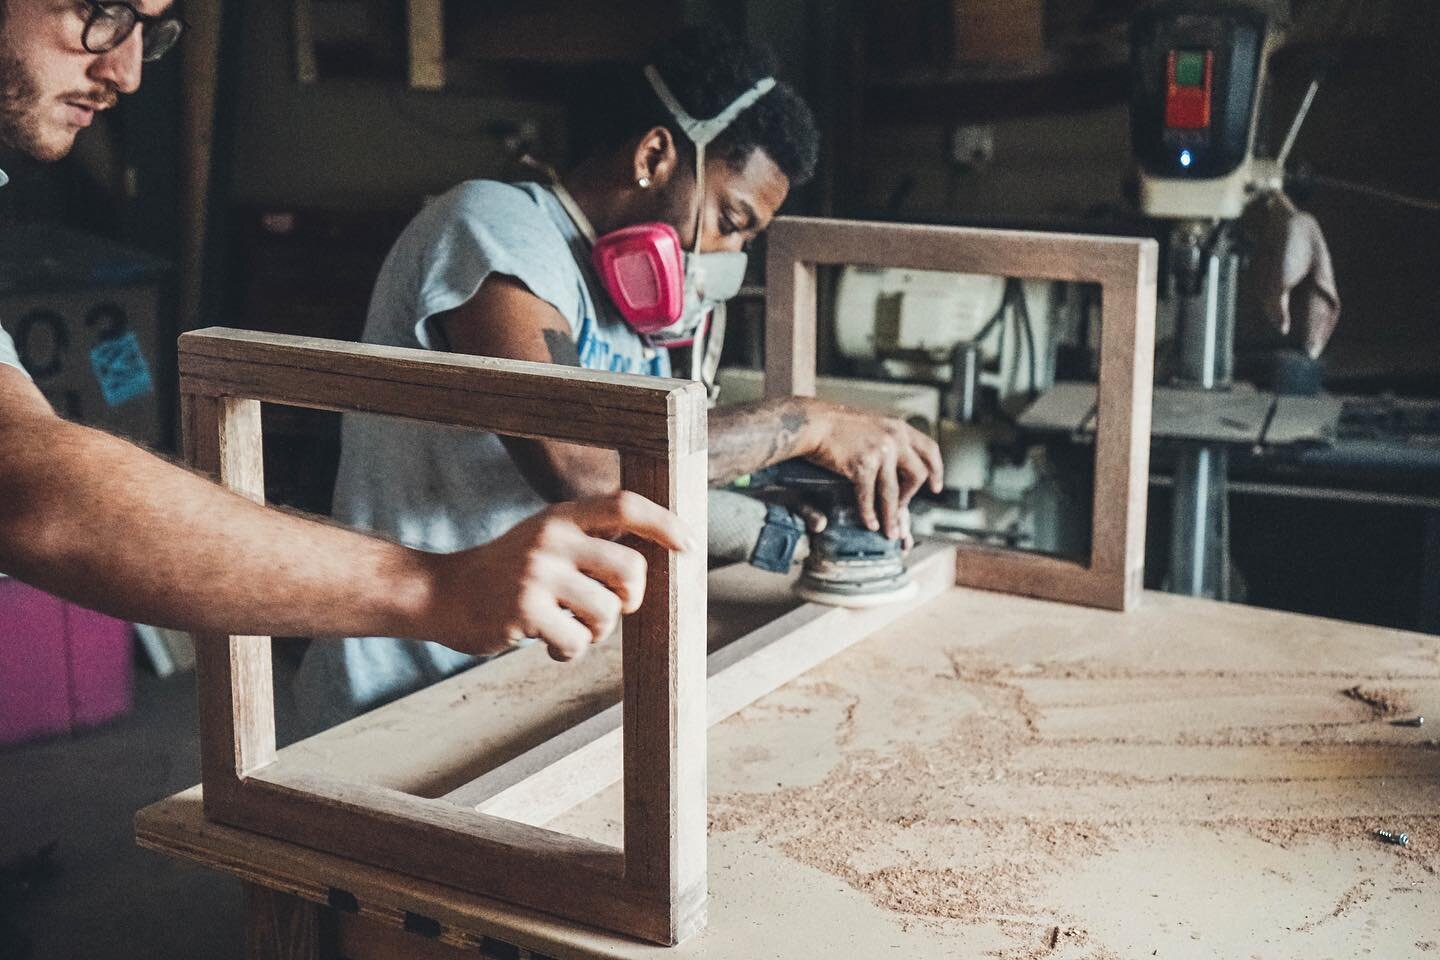 Crafting a brighter future, one piece of wood at a time 🪵☀️ #EmployTrainMentor #CustomWoodworking #nashville